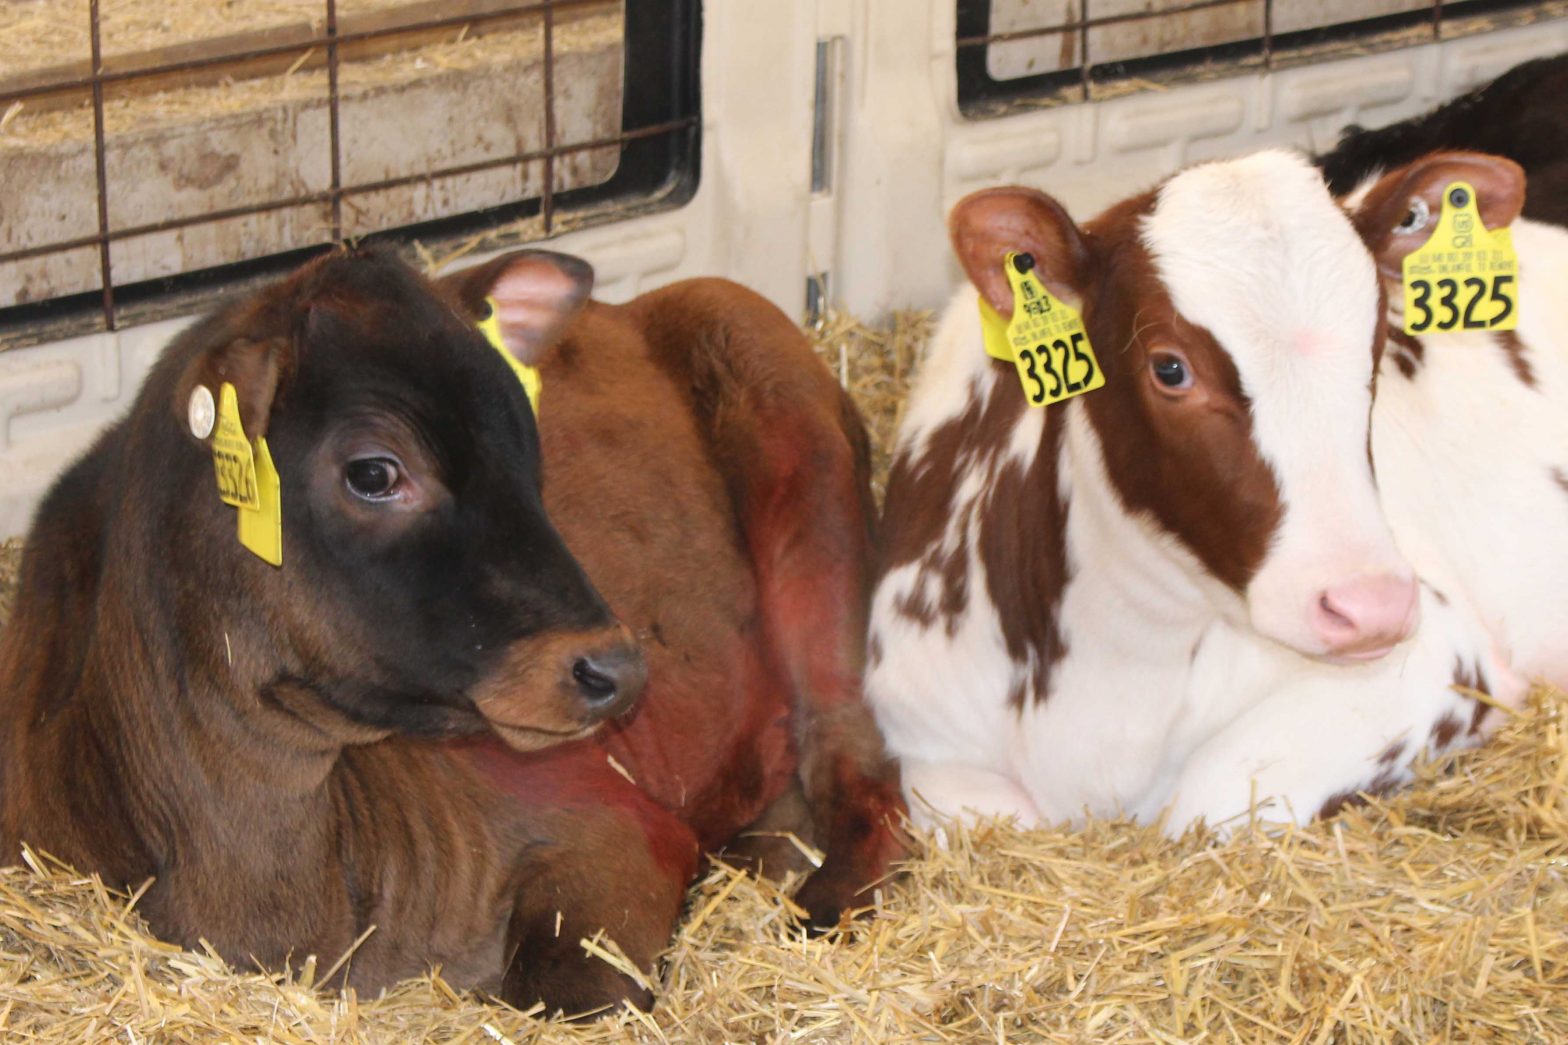 Sunrise Dairy LLC in Suring, Wisconsin, milks about 1,300 cows crossbred between Holstein, Jersey and Montbéliarde.